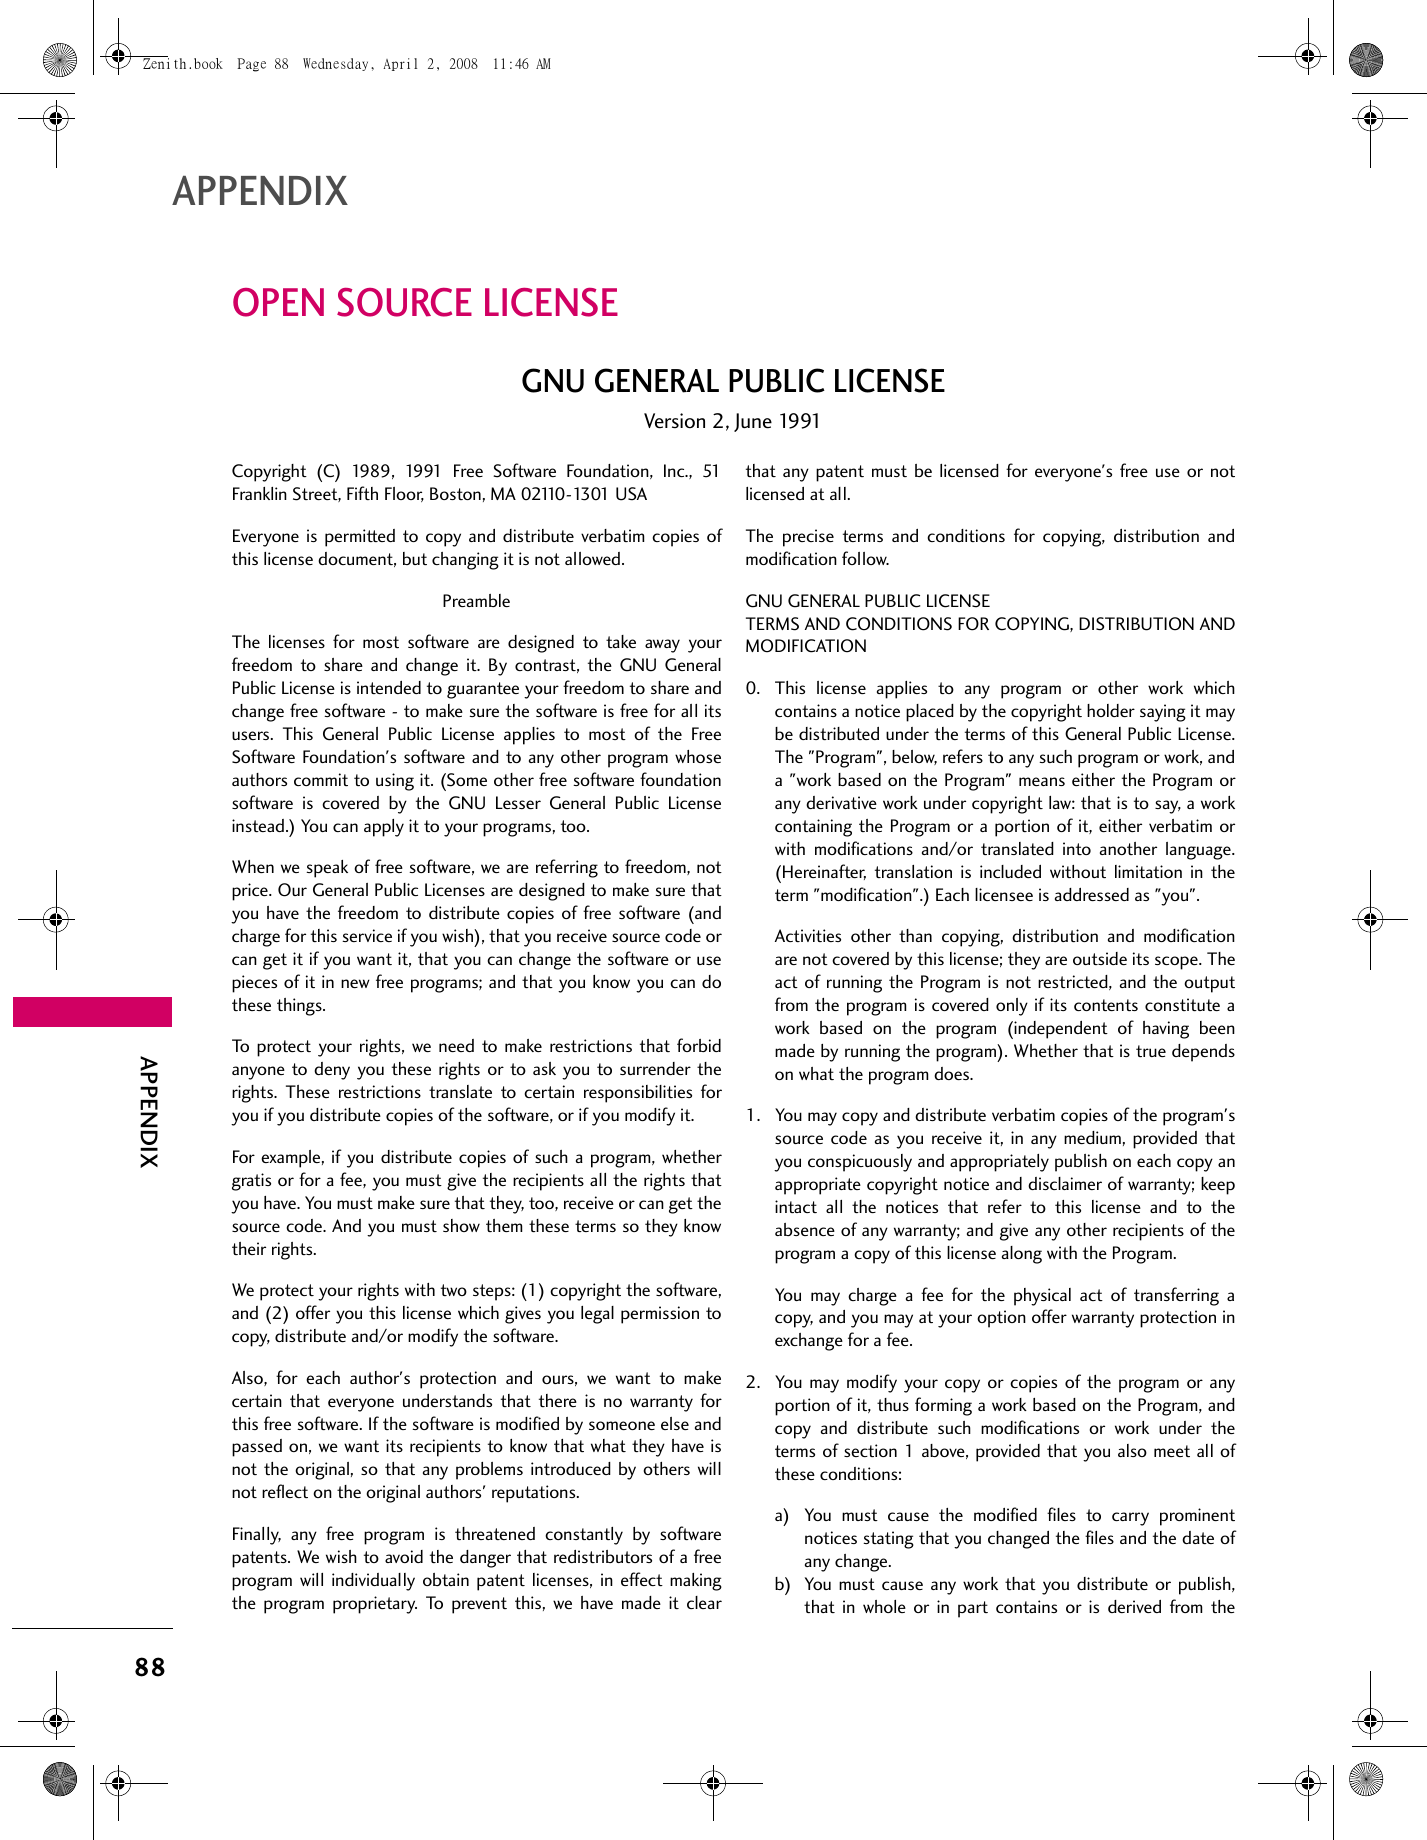 88APPENDIXAPPENDIXOPEN SOURCE LICENSEGNU GENERAL PUBLIC LICENSEVersion 2, June 1991Copyright (C) 1989, 1991 Free Software Foundation, Inc., 51Franklin Street, Fifth Floor, Boston, MA 02110-1301 USAEveryone is permitted to copy and distribute verbatim copies ofthis license document, but changing it is not allowed.PreambleThe licenses for most software are designed to take away yourfreedom to share and change it. By contrast, the GNU GeneralPublic License is intended to guarantee your freedom to share andchange free software - to make sure the software is free for all itsusers. This General Public License applies to most of the FreeSoftware Foundation&apos;s software and to any other program whoseauthors commit to using it. (Some other free software foundationsoftware is covered by the GNU Lesser General Public Licenseinstead.) You can apply it to your programs, too.When we speak of free software, we are referring to freedom, notprice. Our General Public Licenses are designed to make sure thatyou have the freedom to distribute copies of free software (andcharge for this service if you wish), that you receive source code orcan get it if you want it, that you can change the software or usepieces of it in new free programs; and that you know you can dothese things.To protect your rights, we need to make restrictions that forbidanyone to deny you these rights or to ask you to surrender therights. These restrictions translate to certain responsibilities foryou if you distribute copies of the software, or if you modify it.For example, if you distribute copies of such a program, whethergratis or for a fee, you must give the recipients all the rights thatyou have. You must make sure that they, too, receive or can get thesource code. And you must show them these terms so they knowtheir rights.We protect your rights with two steps: (1) copyright the software,and (2) offer you this license which gives you legal permission tocopy, distribute and/or modify the software.Also, for each author&apos;s protection and ours, we want to makecertain that everyone understands that there is no warranty forthis free software. If the software is modified by someone else andpassed on, we want its recipients to know that what they have isnot the original, so that any problems introduced by others willnot reflect on the original authors&apos; reputations.Finally, any free program is threatened constantly by softwarepatents. We wish to avoid the danger that redistributors of a freeprogram will individually obtain patent licenses, in effect makingthe program proprietary. To prevent this, we have made it clearthat any patent must be licensed for everyone&apos;s free use or notlicensed at all.The precise terms and conditions for copying, distribution andmodification follow.GNU GENERAL PUBLIC LICENSE TERMS AND CONDITIONS FOR COPYING, DISTRIBUTION ANDMODIFICATION0. This license applies to any program or other work whichcontains a notice placed by the copyright holder saying it maybe distributed under the terms of this General Public License.The &quot;Program&quot;, below, refers to any such program or work, anda &quot;work based on the Program&quot; means either the Program orany derivative work under copyright law: that is to say, a workcontaining the Program or a portion of it, either verbatim orwith modifications and/or translated into another language.(Hereinafter, translation is included without limitation in theterm &quot;modification&quot;.) Each licensee is addressed as &quot;you&quot;.Activities other than copying, distribution and modificationare not covered by this license; they are outside its scope. Theact of running the Program is not restricted, and the outputfrom the program is covered only if its contents constitute awork based on the program (independent of having beenmade by running the program). Whether that is true dependson what the program does.1. You may copy and distribute verbatim copies of the program&apos;ssource code as you receive it, in any medium, provided thatyou conspicuously and appropriately publish on each copy anappropriate copyright notice and disclaimer of warranty; keepintact all the notices that refer to this license and to theabsence of any warranty; and give any other recipients of theprogram a copy of this license along with the Program.You may charge a fee for the physical act of transferring acopy, and you may at your option offer warranty protection inexchange for a fee.2. You may modify your copy or copies of the program or anyportion of it, thus forming a work based on the Program, andcopy and distribute such modifications or work under theterms of section 1 above, provided that you also meet all ofthese conditions:a) You must cause the modified files to carry prominentnotices stating that you changed the files and the date ofany change.b) You must cause any work that you distribute or publish,that in whole or in part contains or is derived from theZenith.book  Page 88  Wednesday, April 2, 2008  11:46 AM